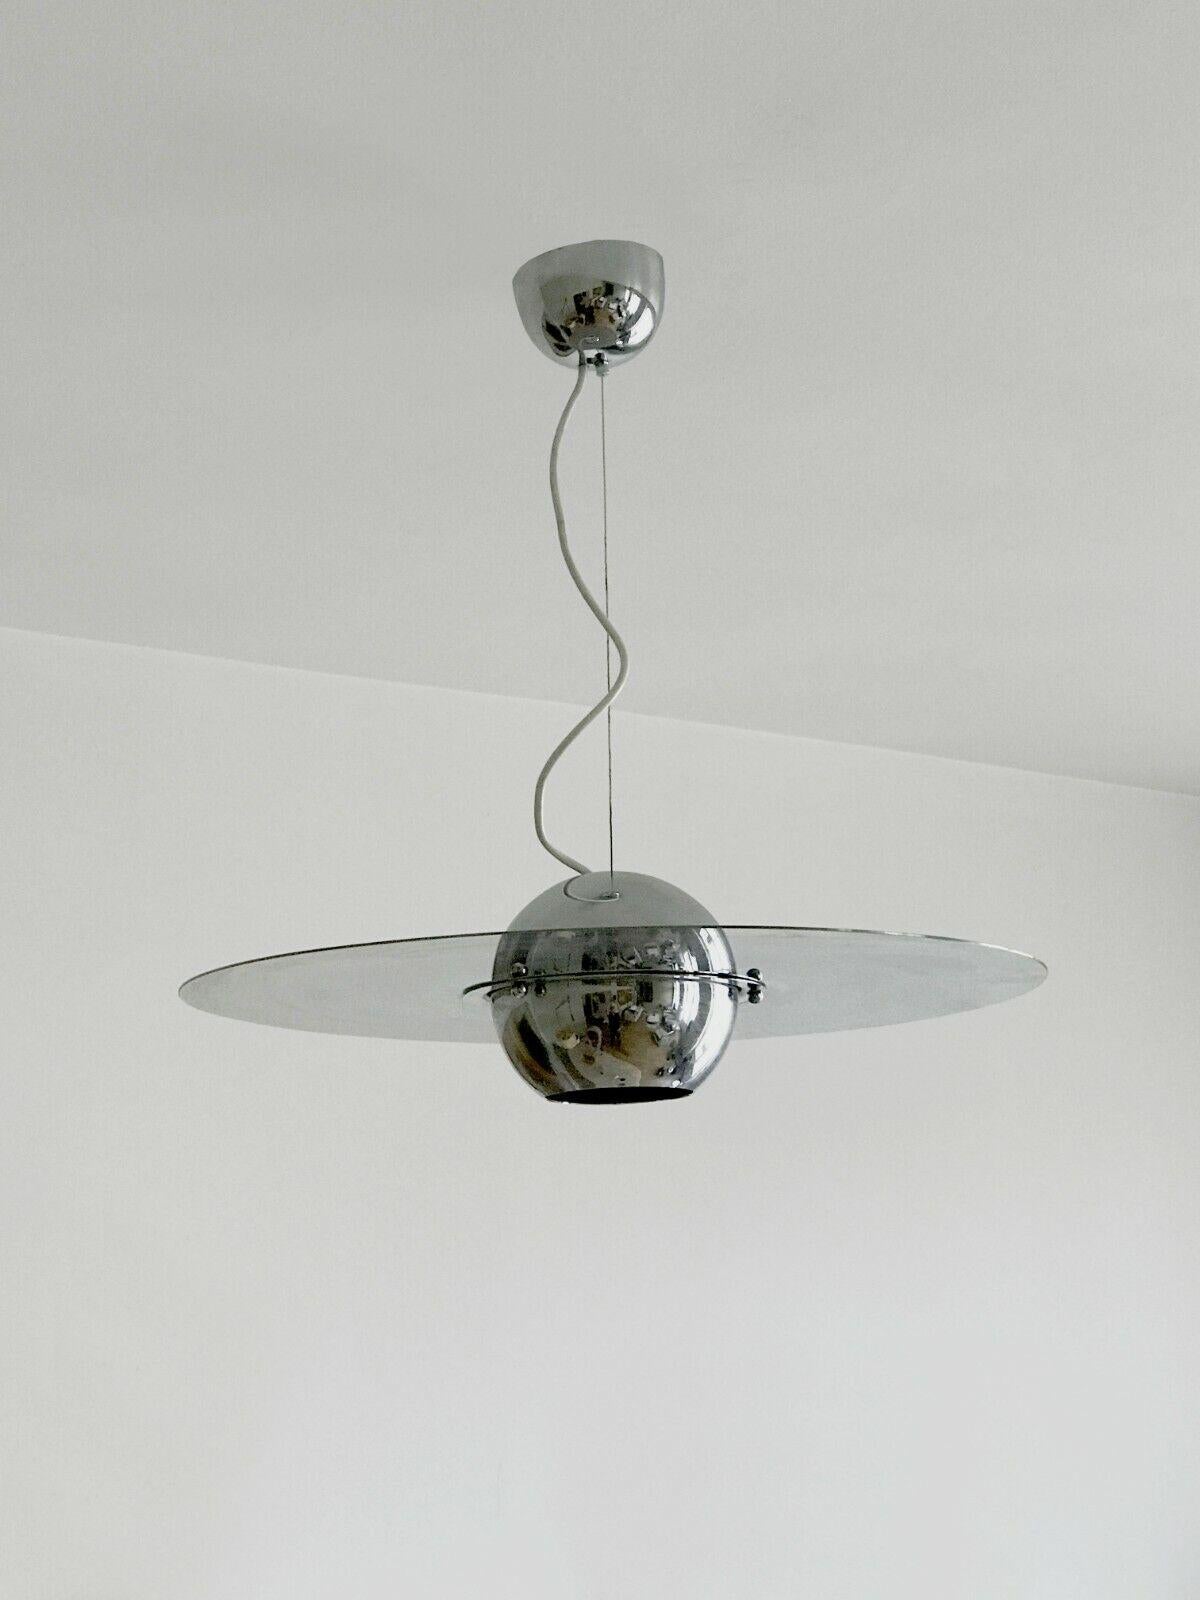 Space Age A SPACE-AGE Ceiling Fixture LAMP by SERGIO MAZZA,  Italy 1960